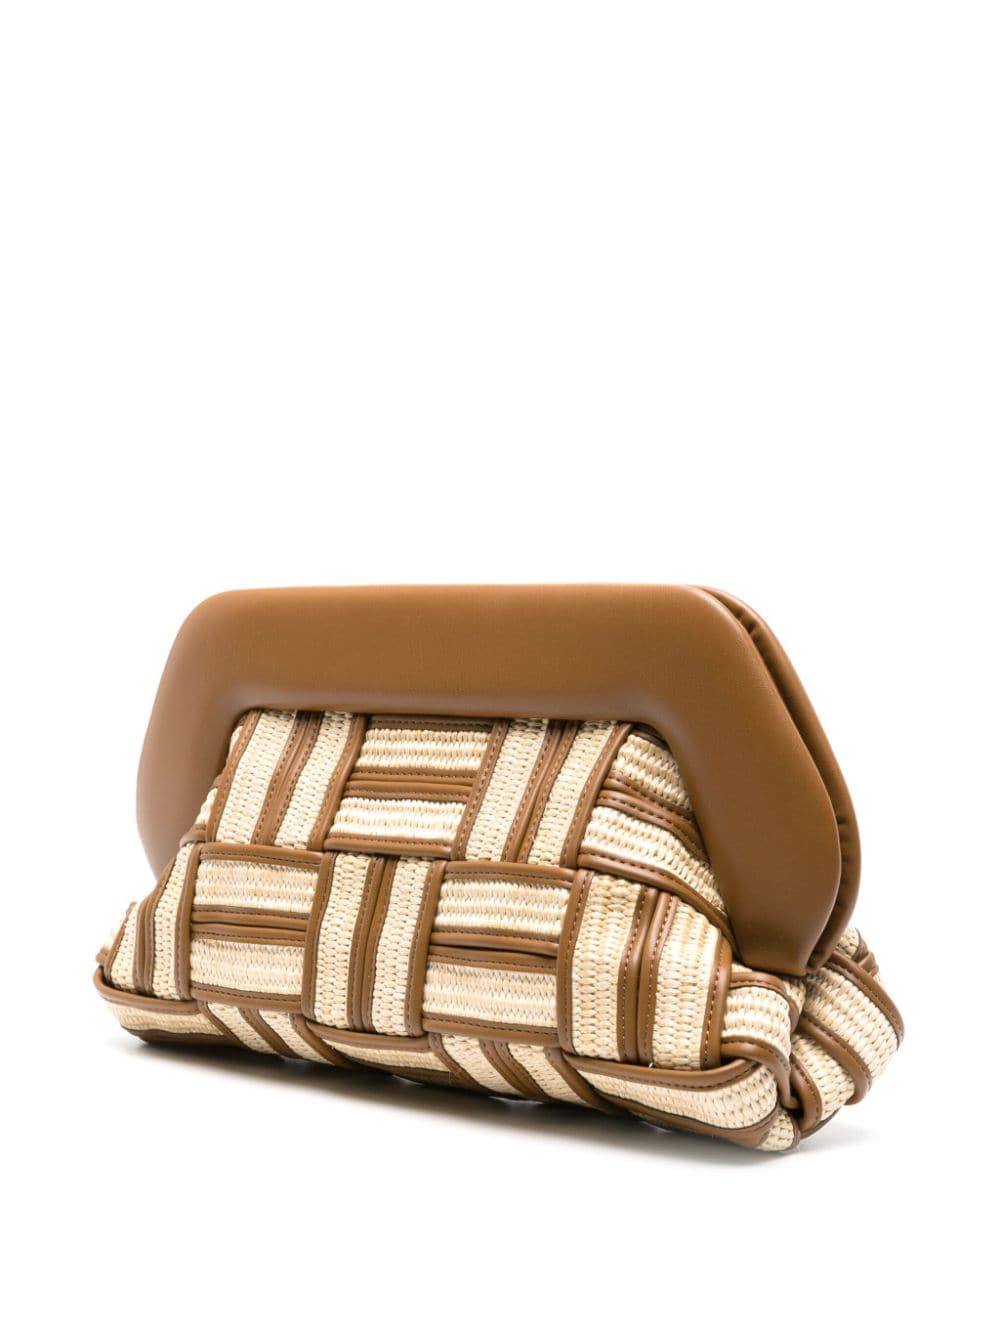 Themoire' Bags.. Brown